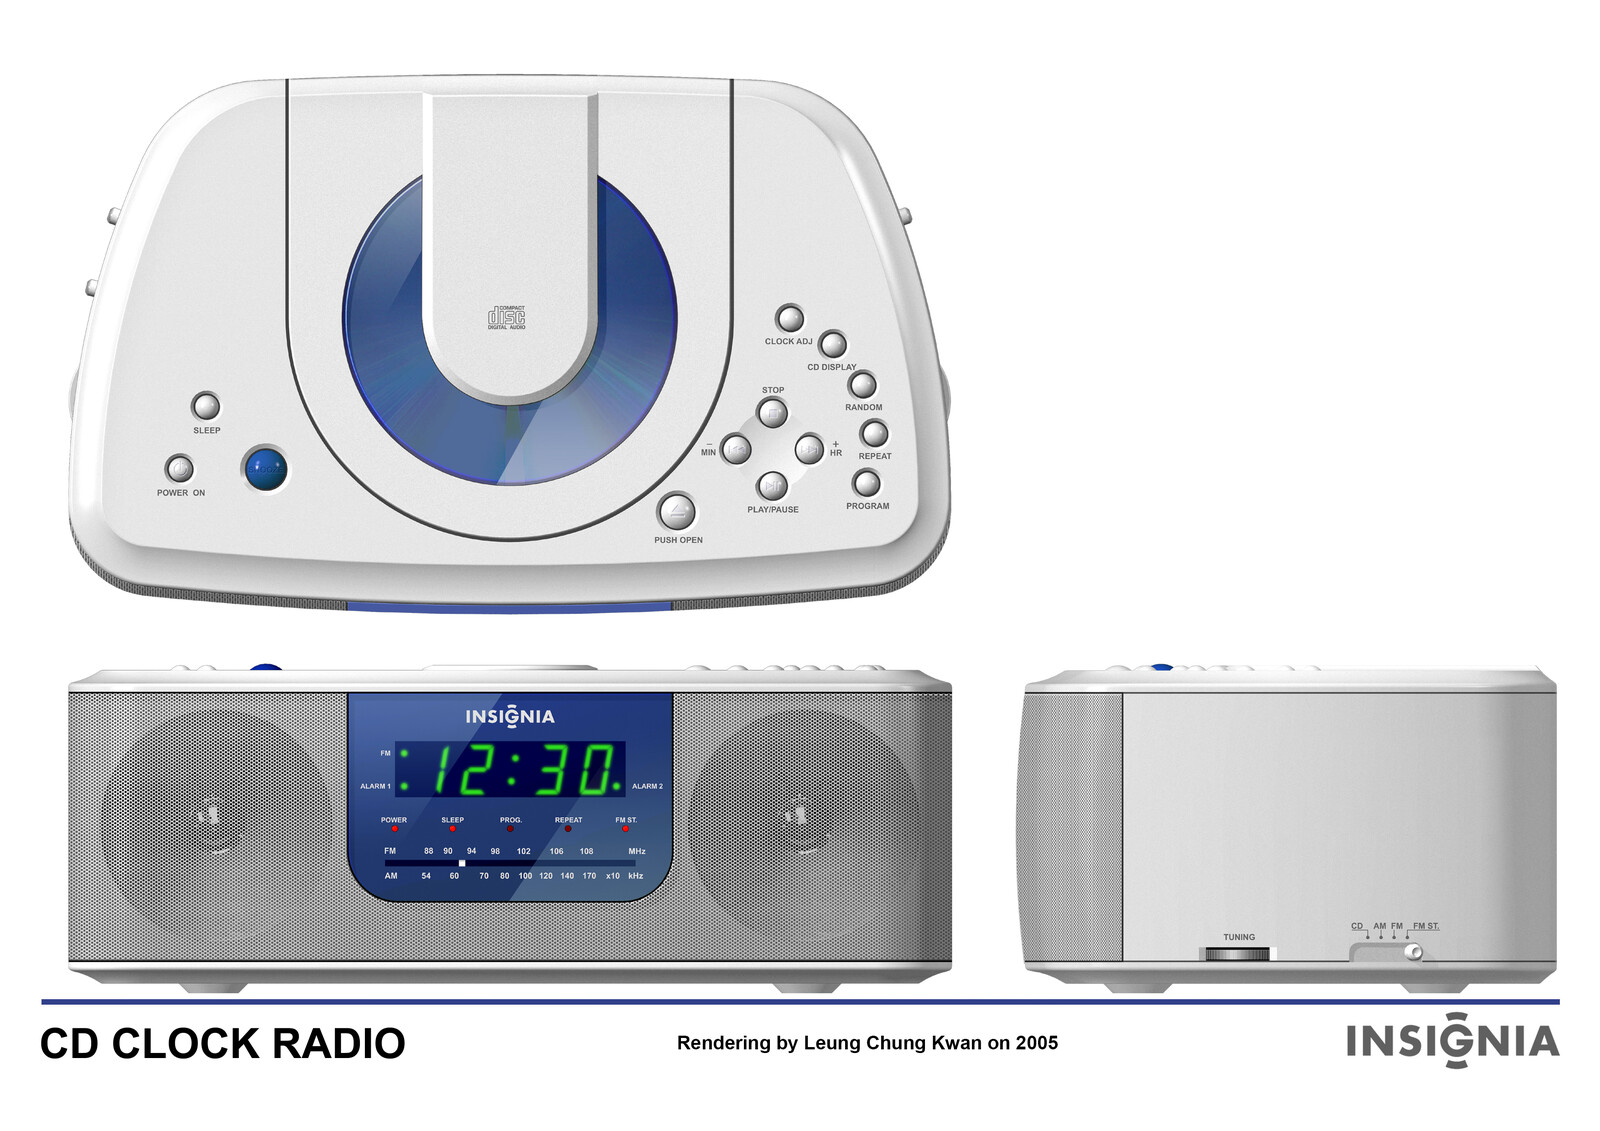 💎 CD Clock Radio | Rendering by Leung Chung Kwan on 2005 💎
Brand Name︰INSIGNA | Client︰Star Light Electronics Co., Ltd.